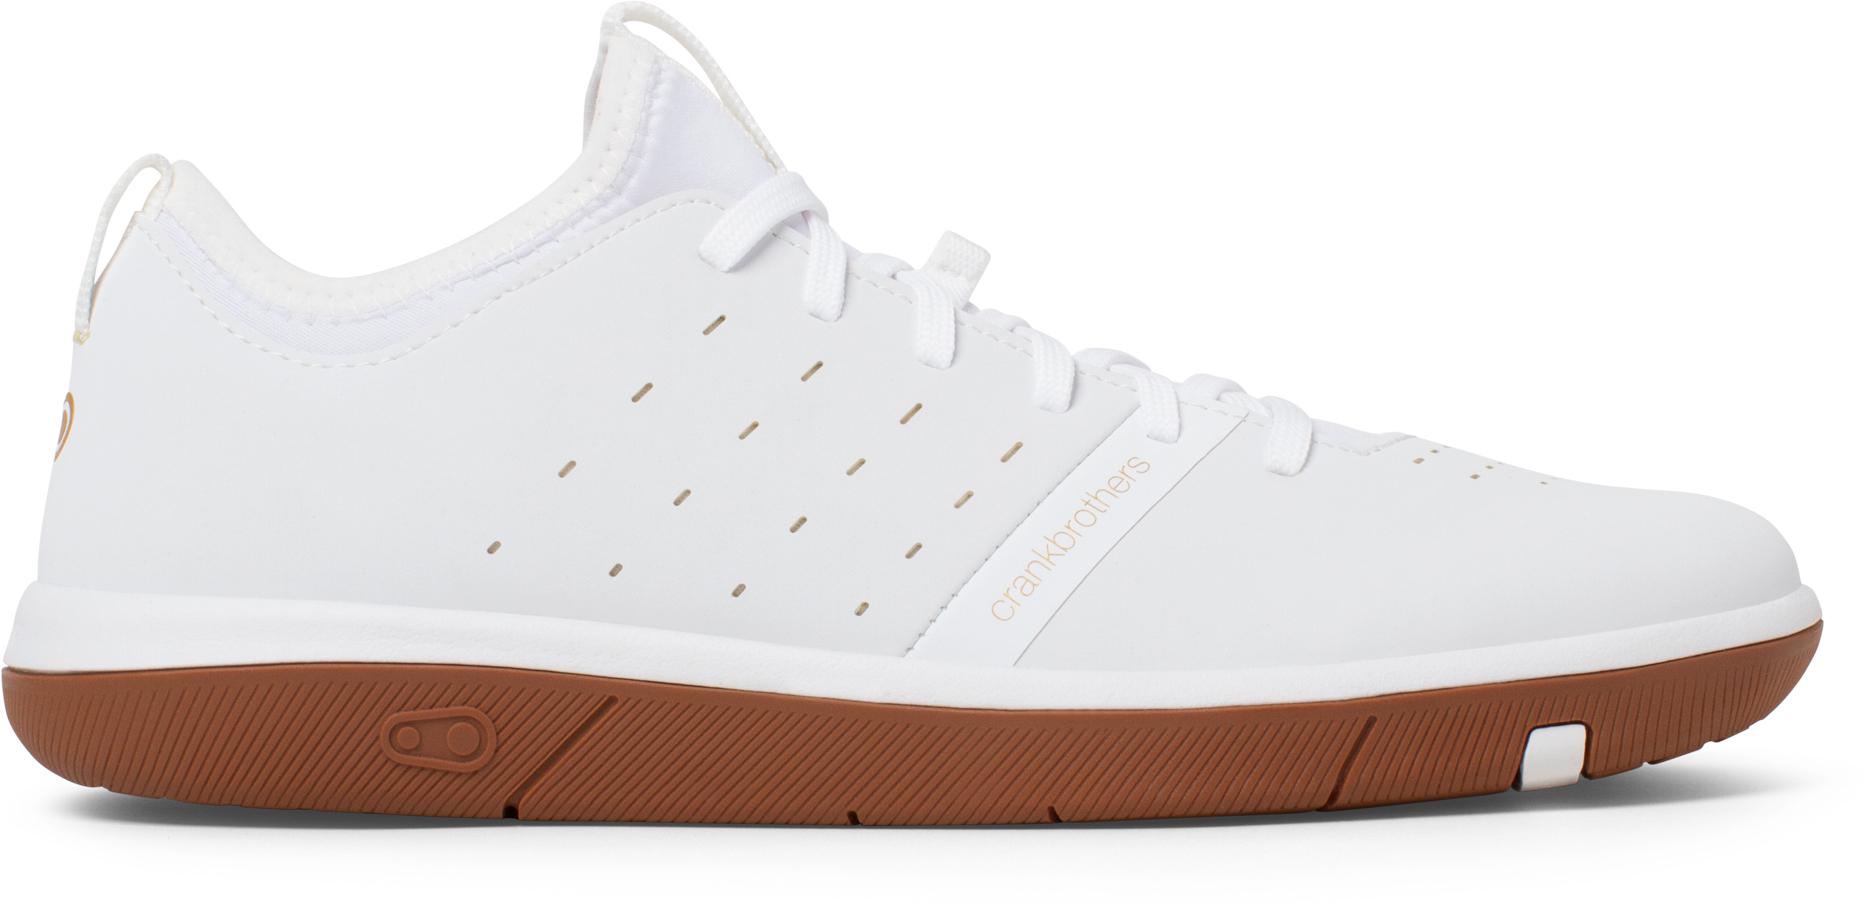 Crankbrothers Stamp Street Flat Pedal Mtb Shoes  White/gold/gum